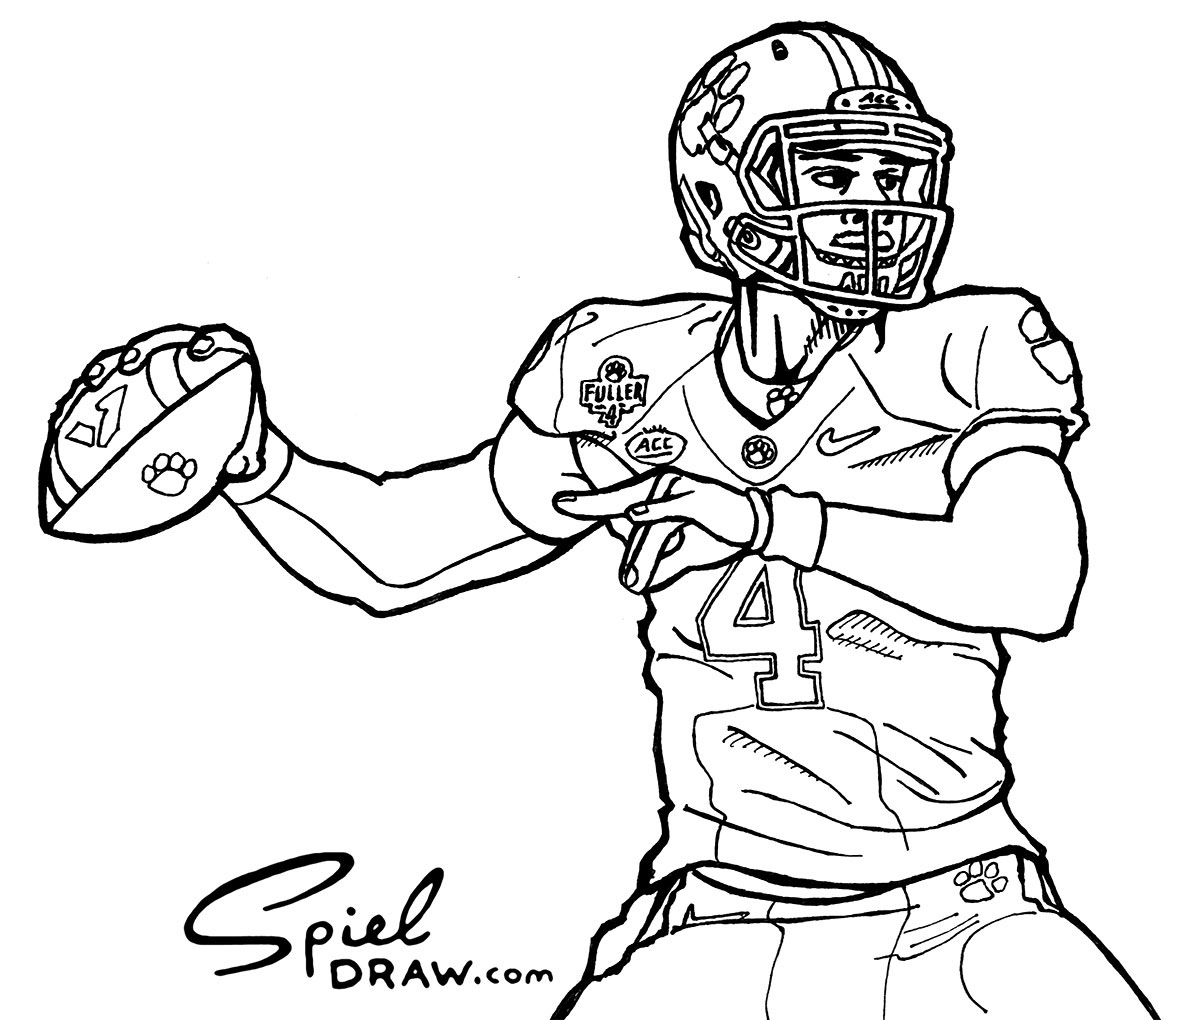 Clemson Coloring Pages - Coloring Pages Kids 2019